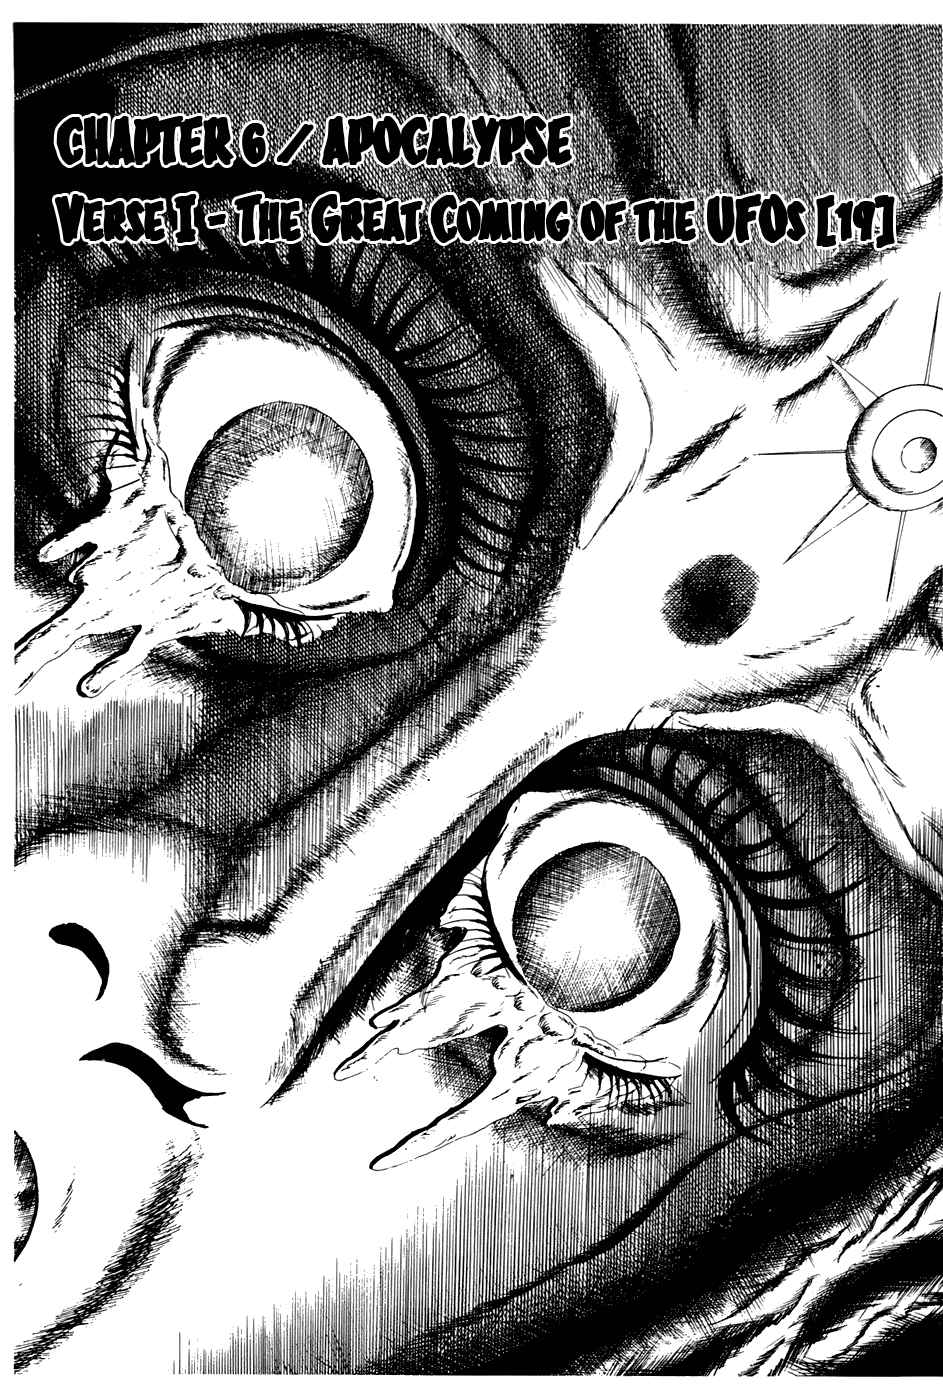 Fourteen Vol. 9 Ch. 171 Apocalypse Verse I The Great Coming of the UFOs (19)